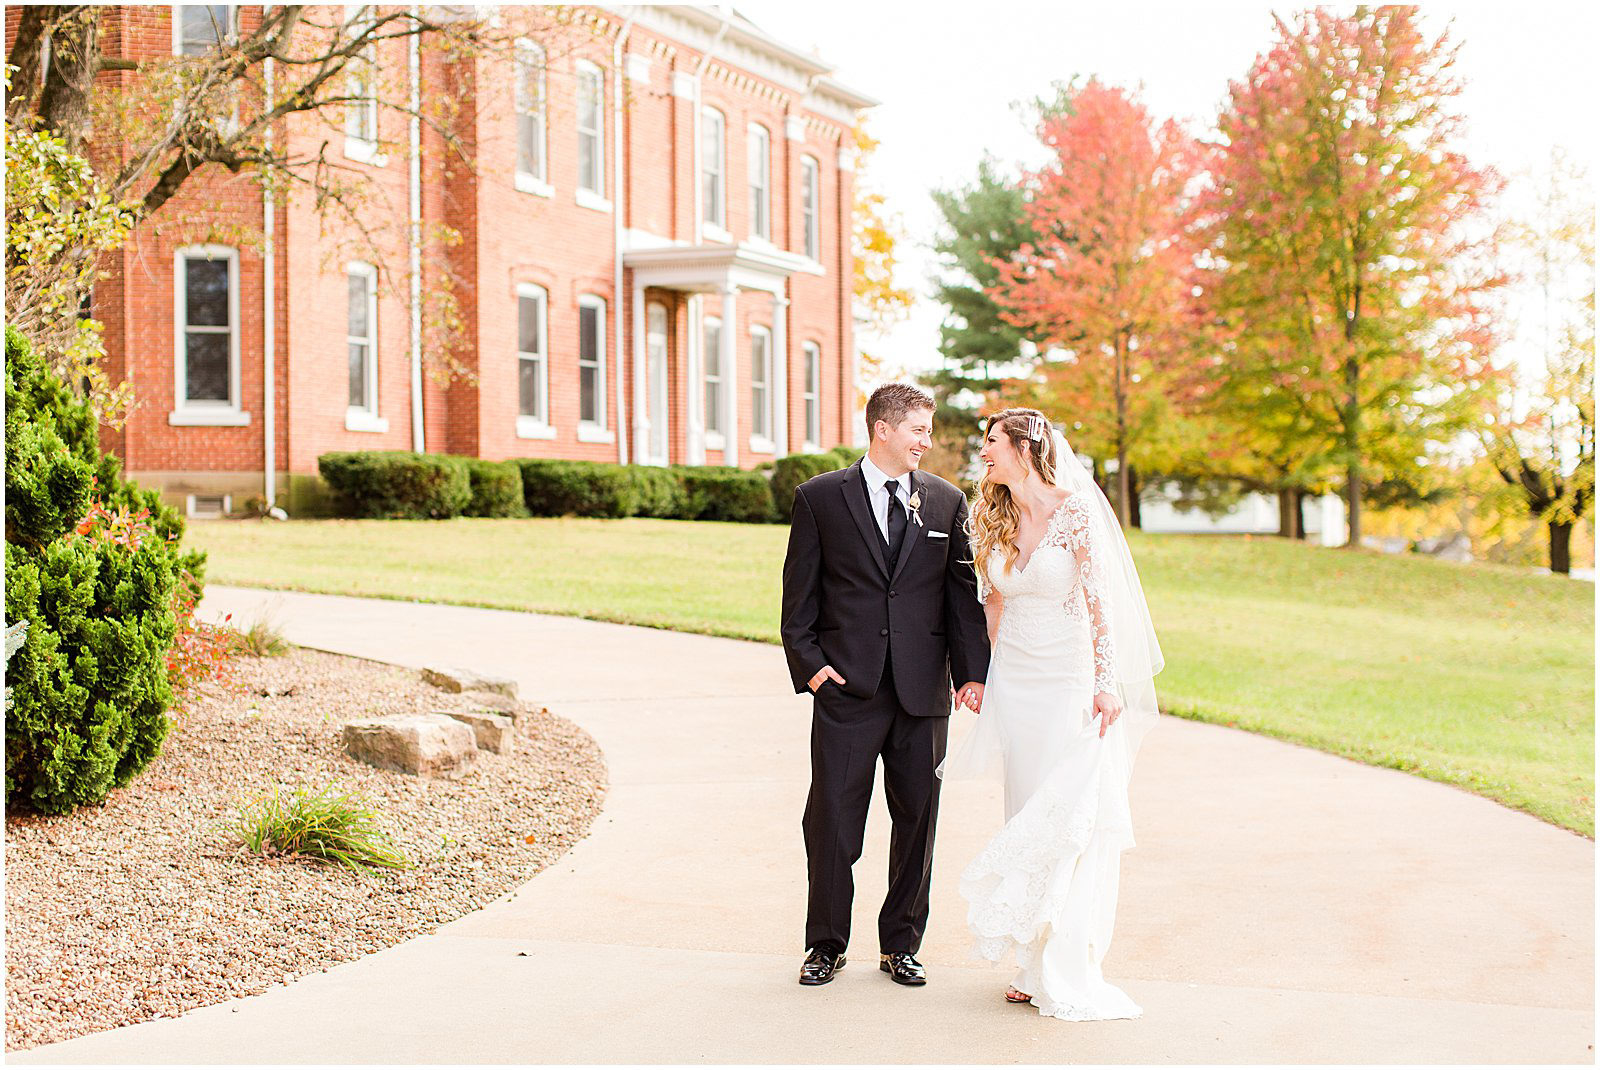 A Romantic Fall Wedding in Ferdinand, IN | Tori and Kyle | Bret and Brandie Photography 0117.jpg